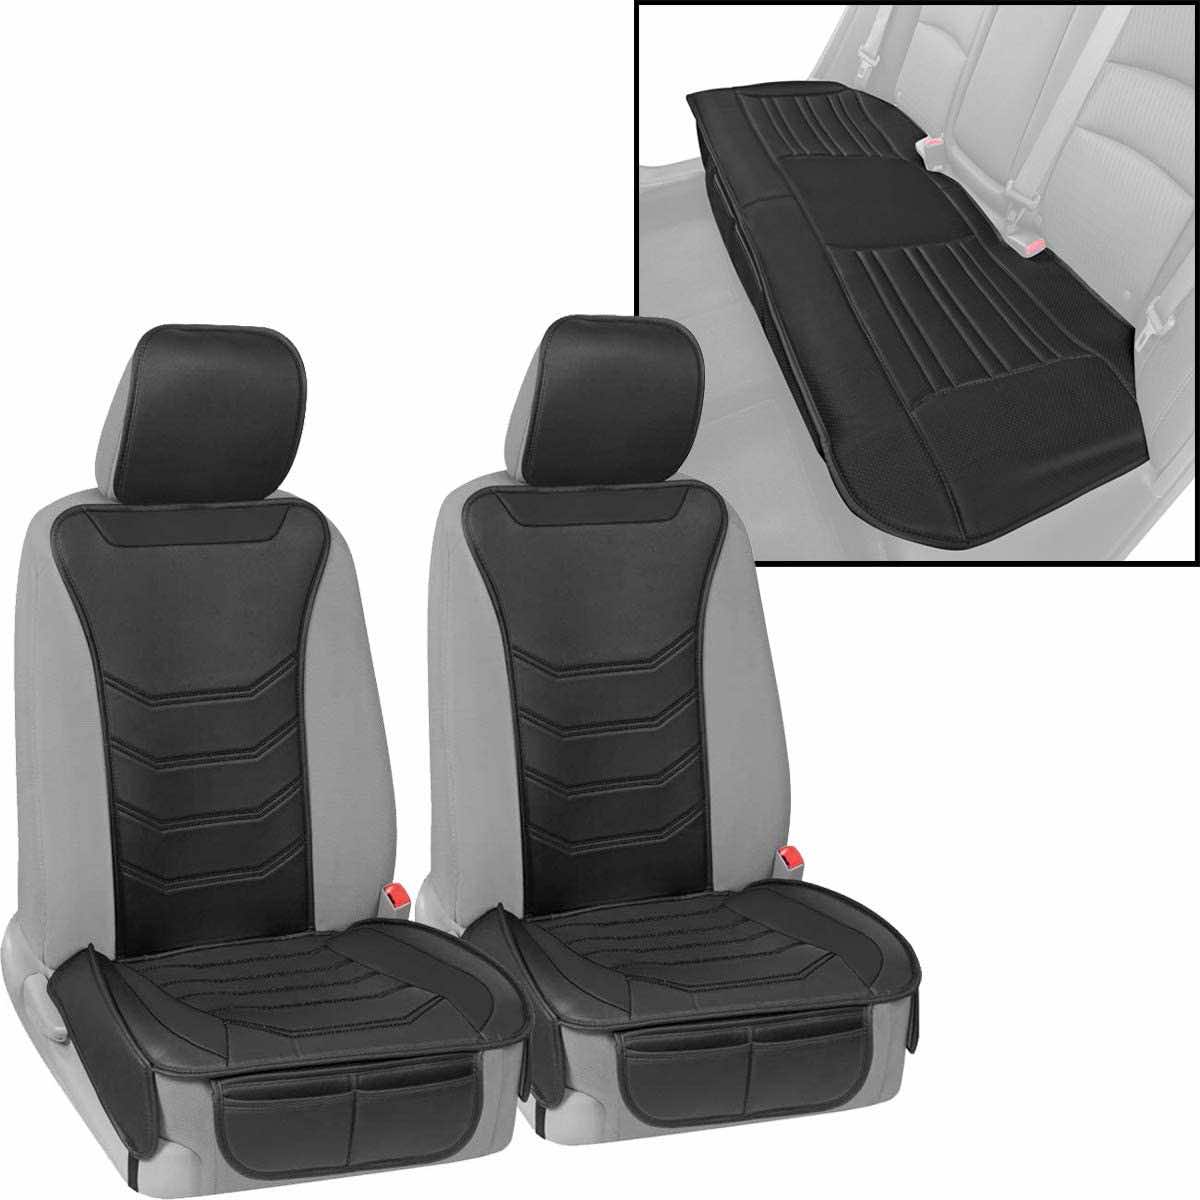 10 Best Leather Seat Covers For Honda Accord Wonderful Eng